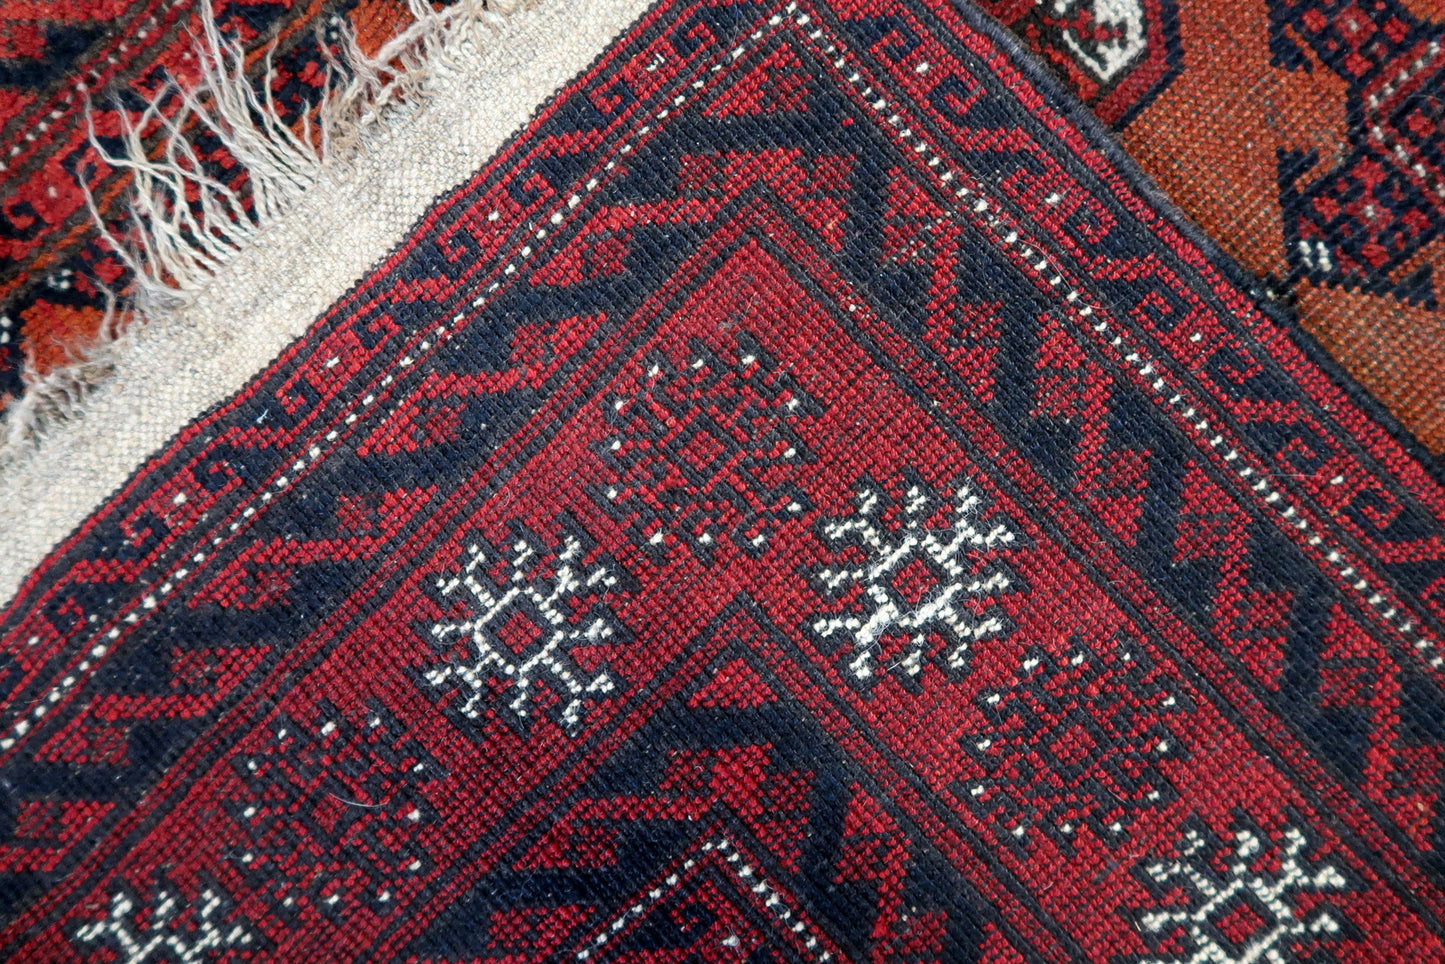 Back side of the Handmade Antique Afghan Baluch Rug - Underside view revealing the rug's construction and material